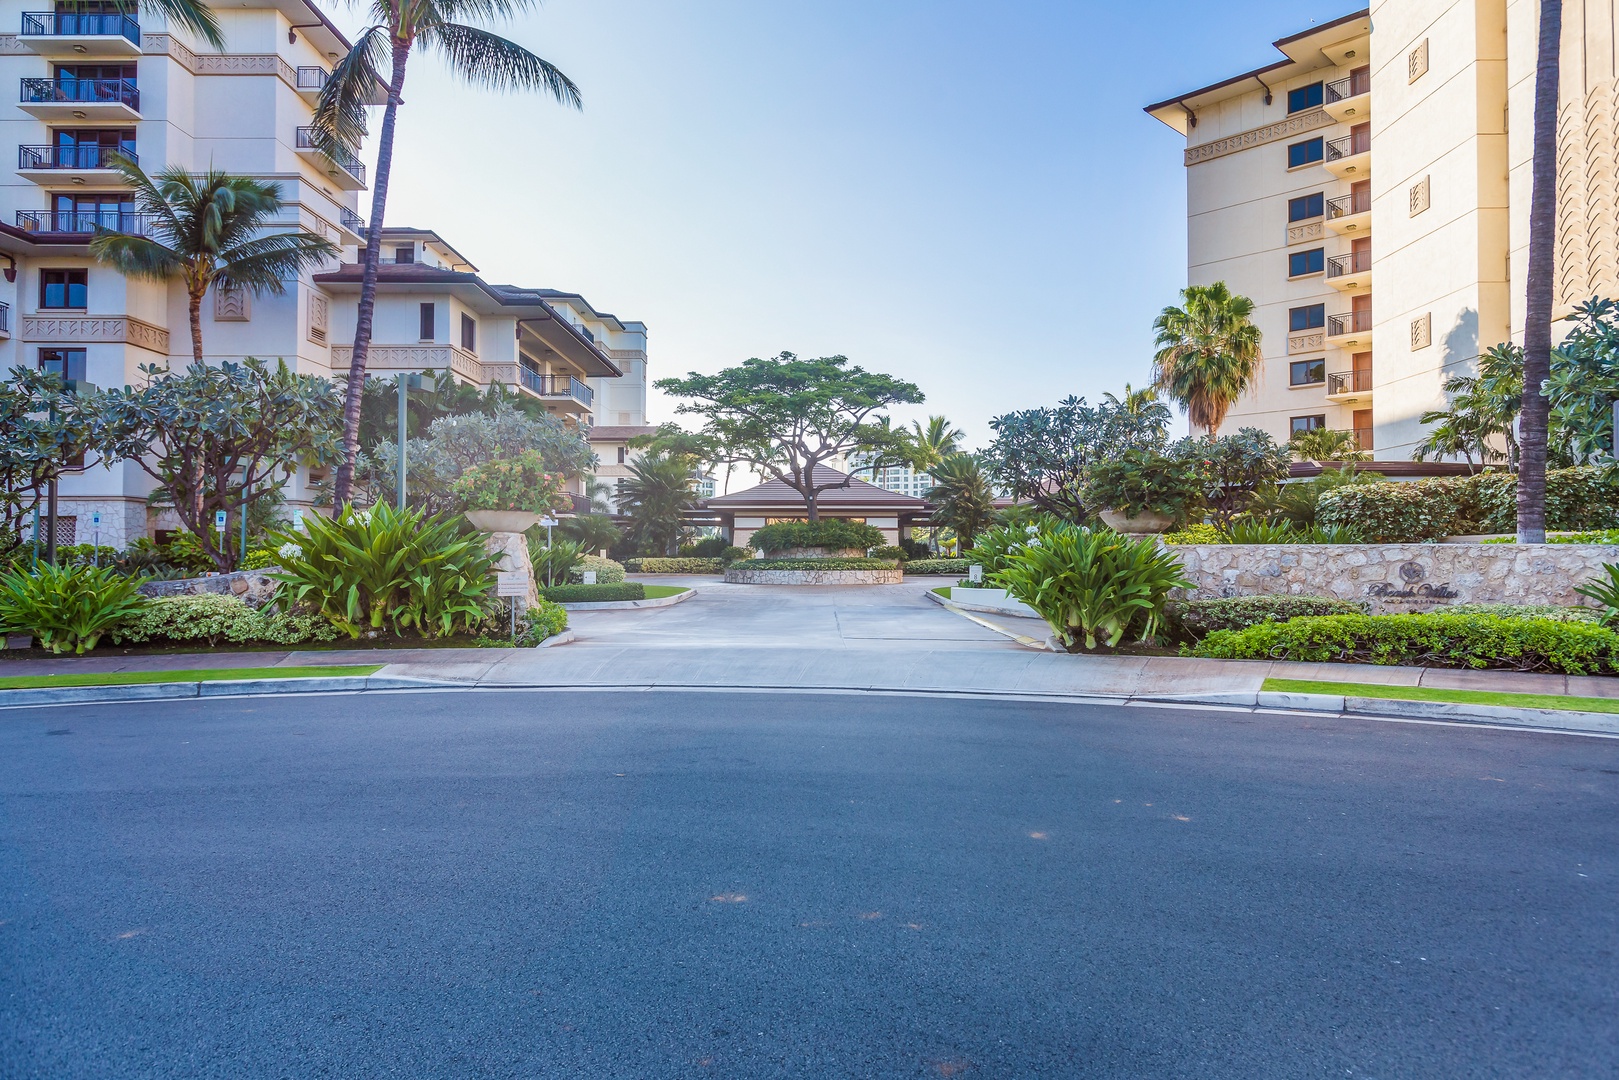 Kapolei Vacation Rentals, Ko Olina Beach Villas O1402 - Welcome to the resort, book your stay today!